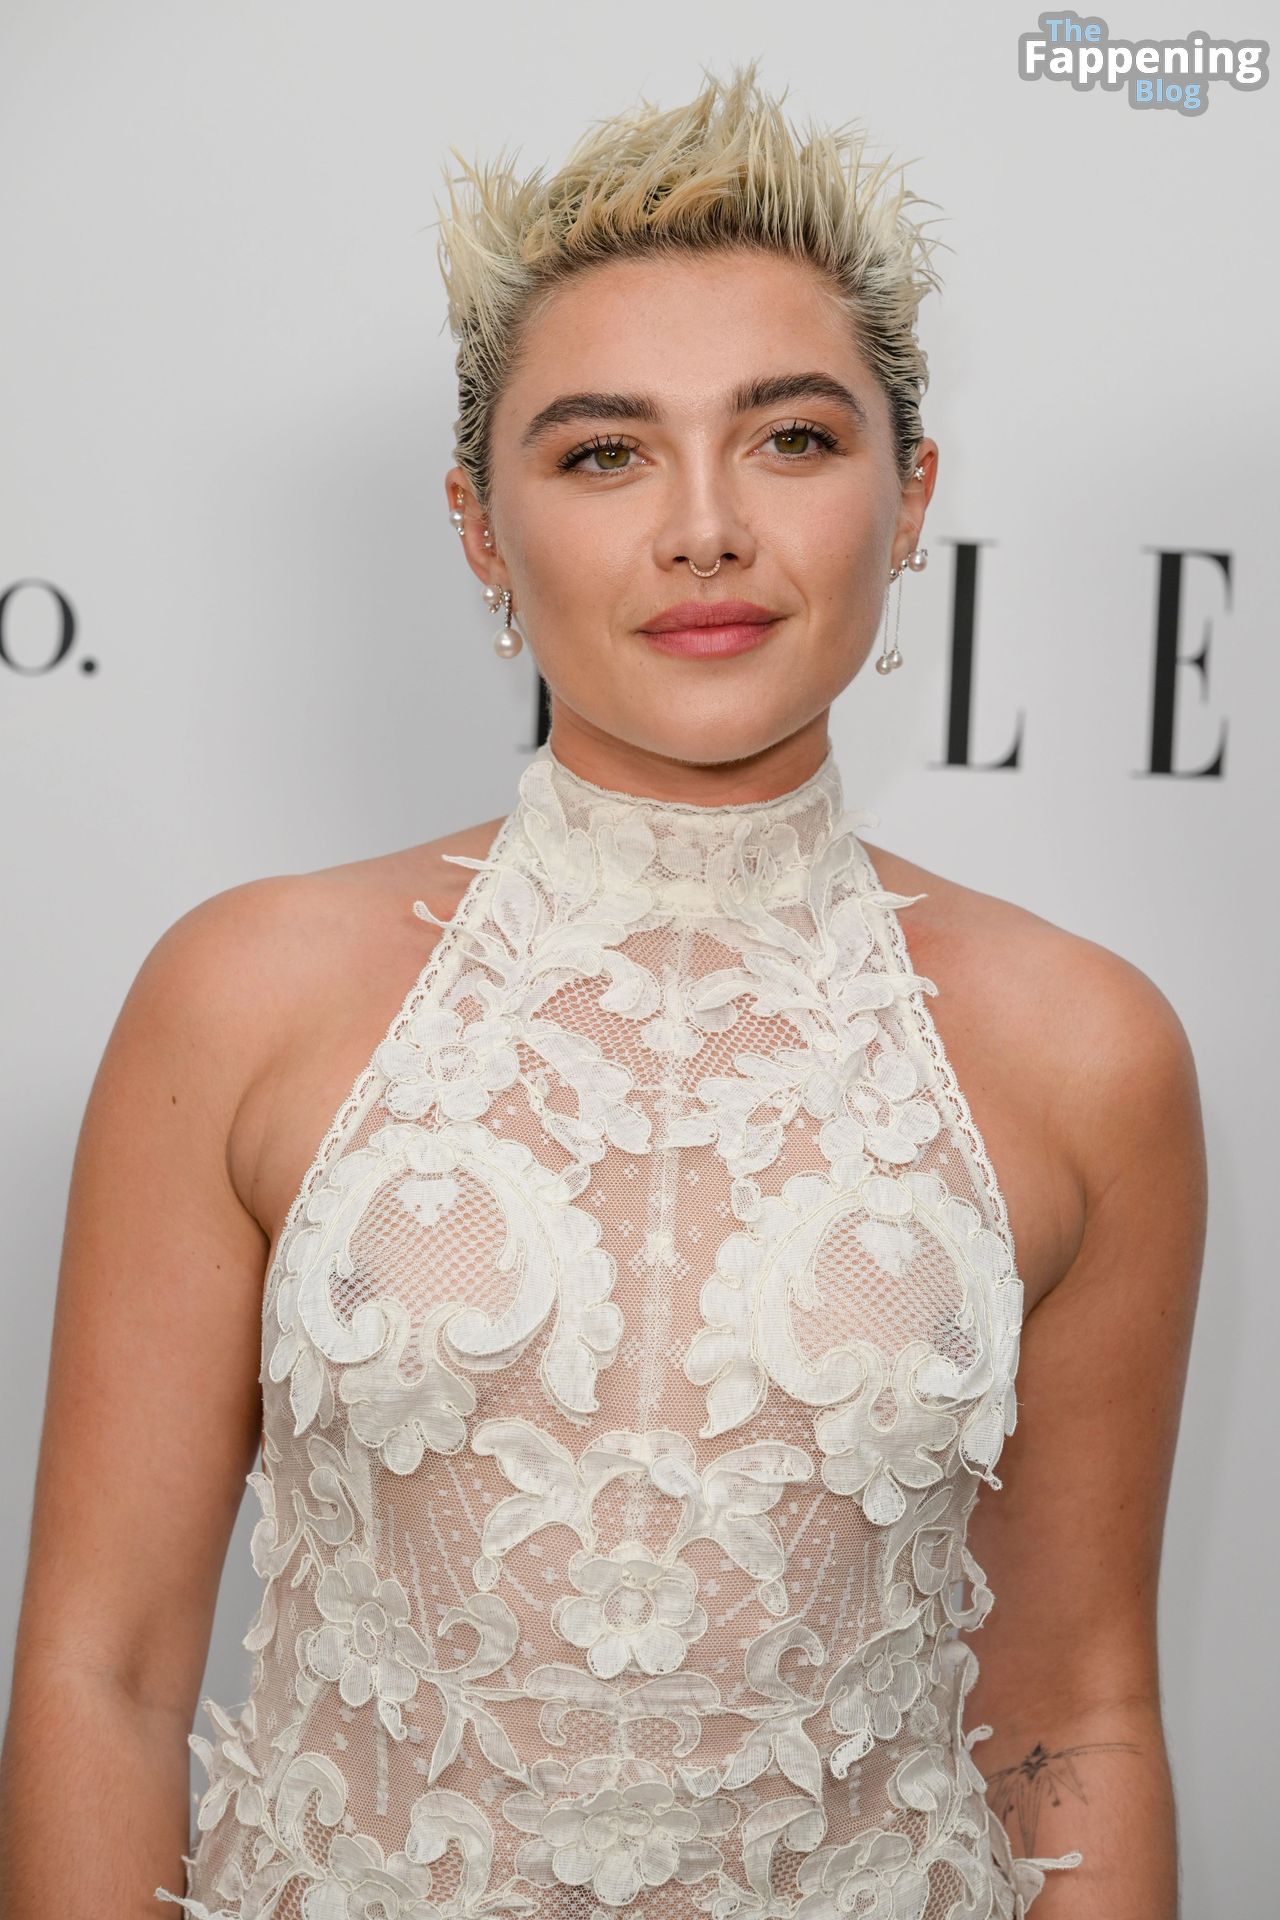 Florence-Pugh-Nude-Tits-46-The-Fappening-Blog.jpg